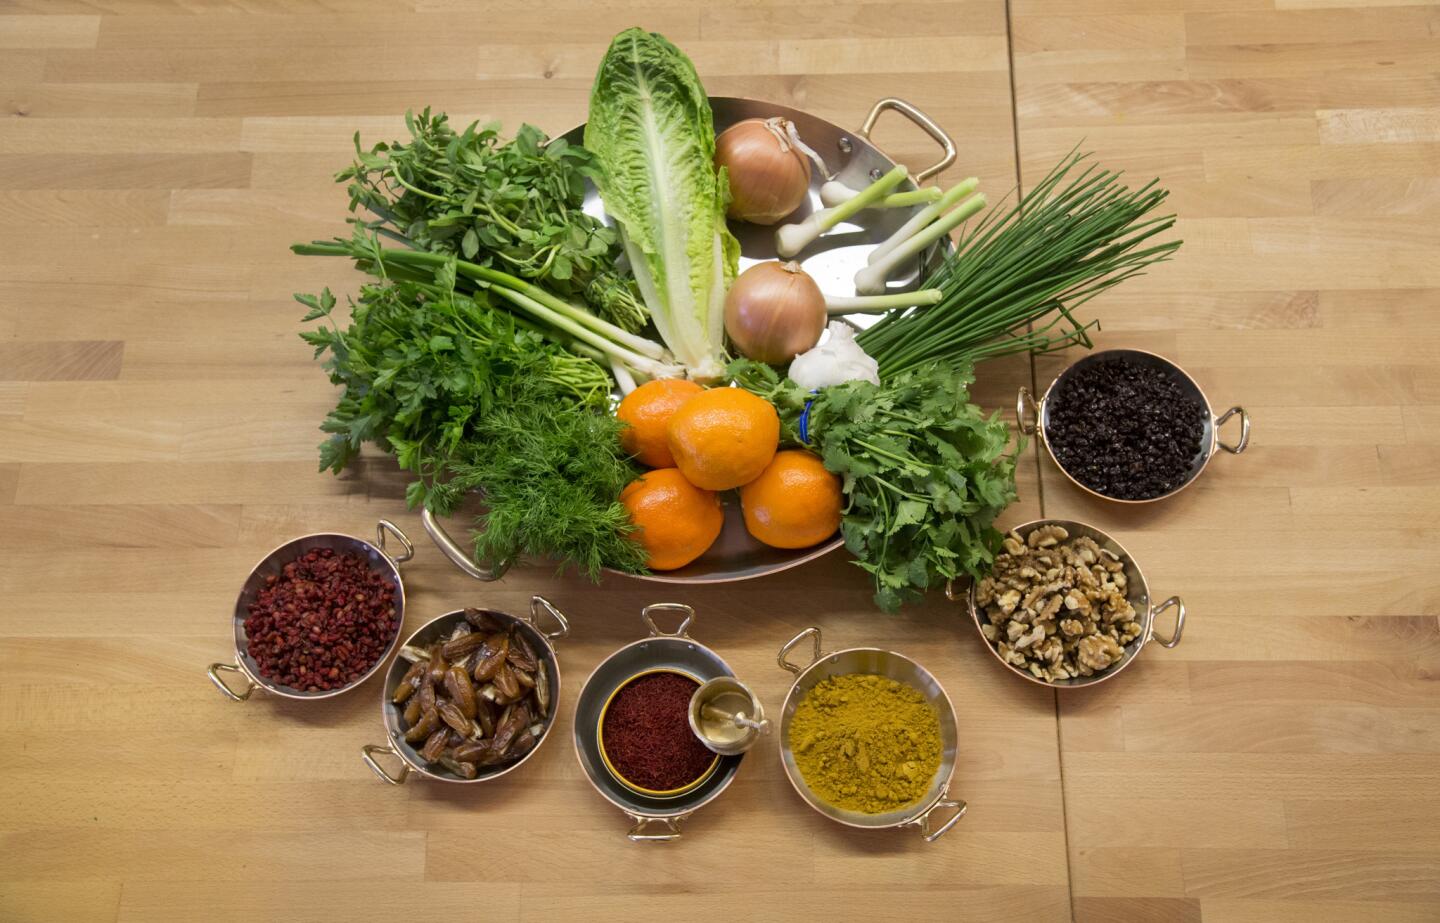 For Nowruz, the Persian New Year, chef Tony Esnault and his family will make three dishes that feature a selection of ingredients: The herbs, onions, oranges and lettuce are for a fried fish and herb rice dish, as well as for the herb-heavy kuku-ye-sabzi. The barberries, from left, go in the kuku; the dates go in the lamb dish; the saffron and Persian spice blend go in all the dishes; the walnuts are for the kuku; and the raisins go in the lamb dish.